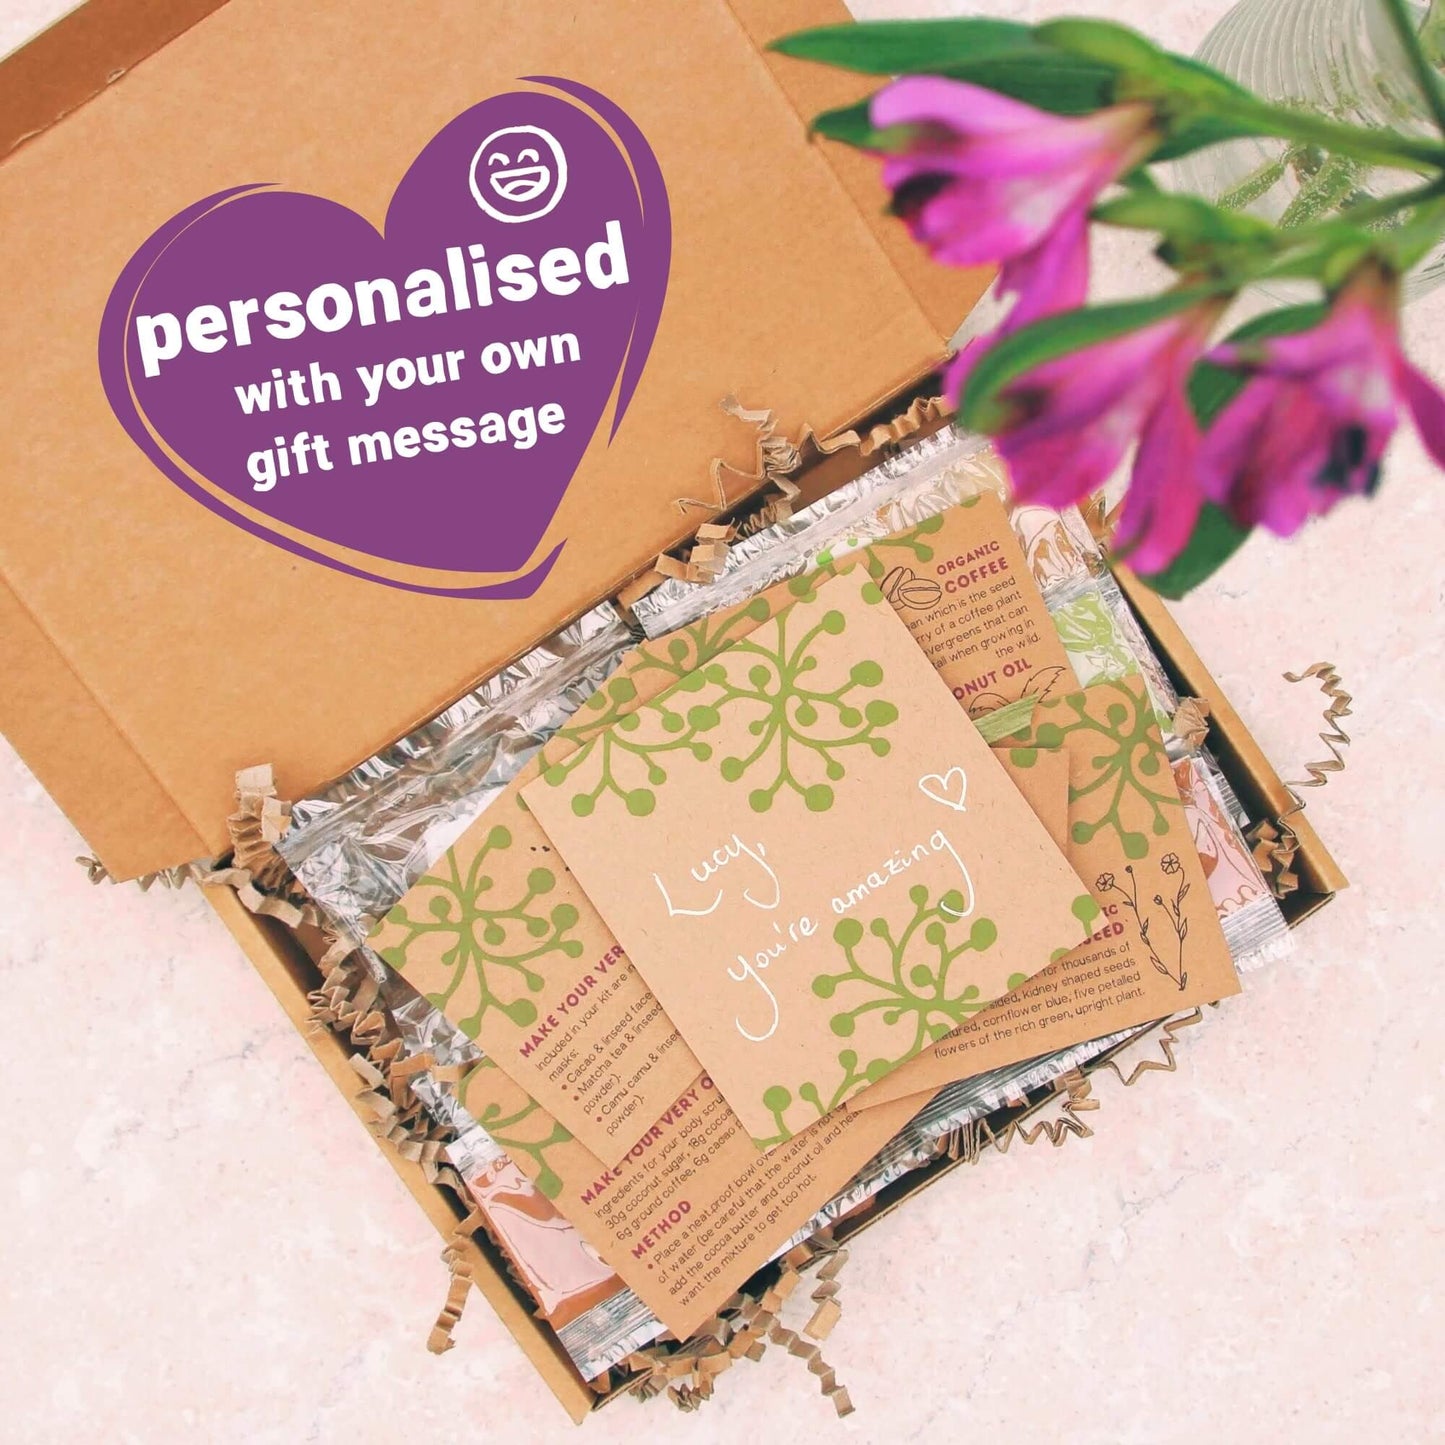 personalised gift message inside thinking of you letterbox gift